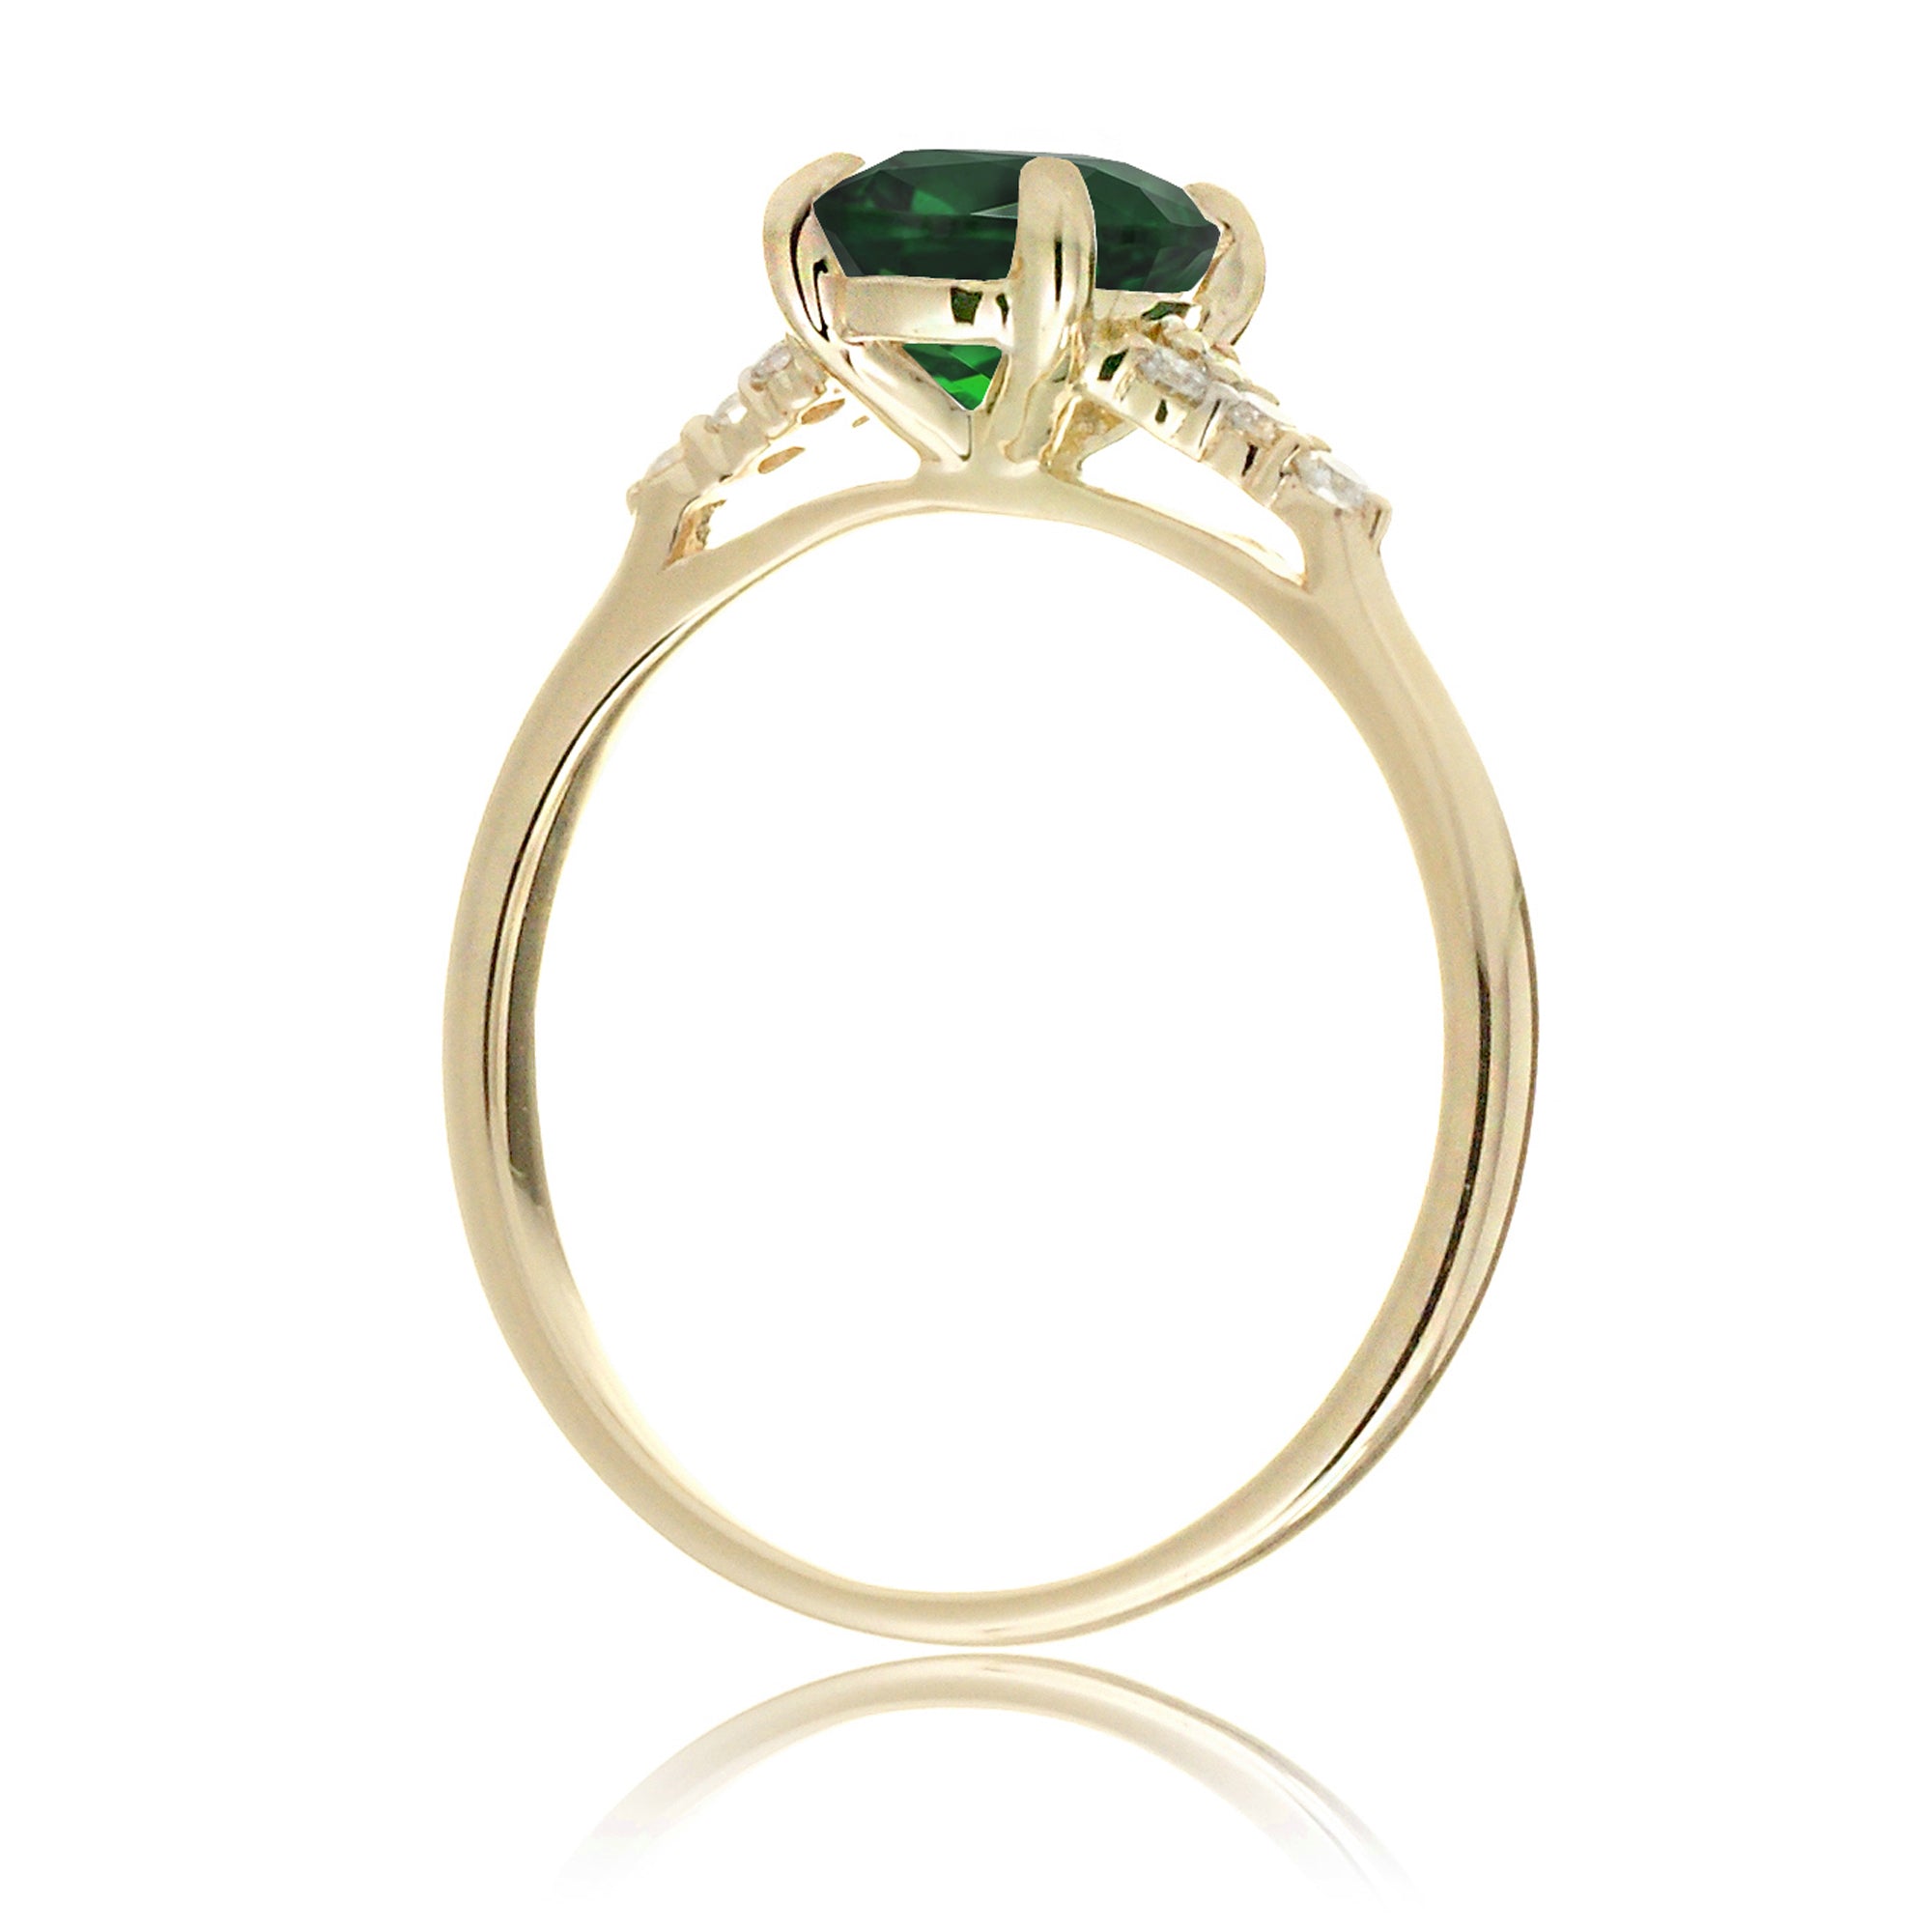 Pear cut emerald and diamond engagement ring in yellow gold - the Chloe lab-grown